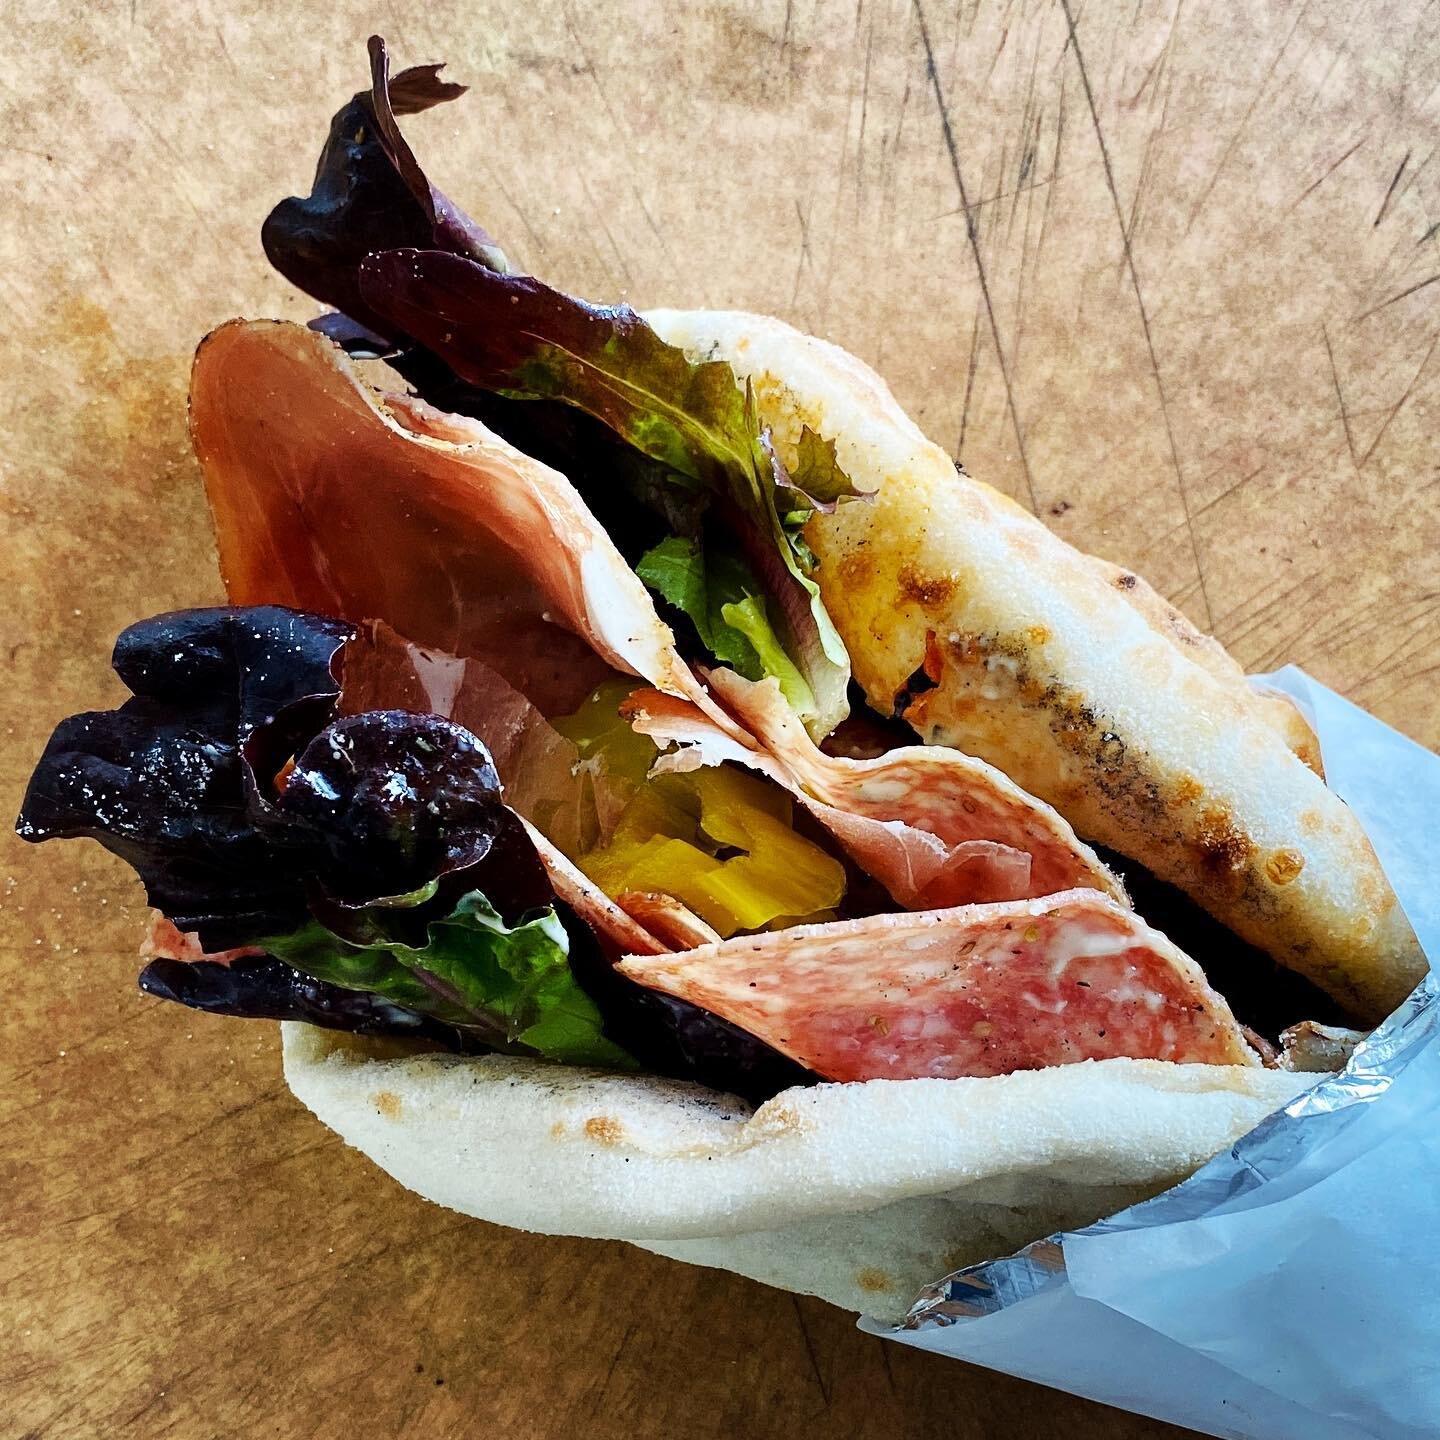 Have you tried the new sandwiches at the Heights Truck yet?! We hope you do and let us know what you think! ⁣
⁣
Order online or walk up. Link in bio!⁣
⁣
𝗜𝘁𝗮𝗹𝗶𝗮𝗻 𝗦𝗮𝗻𝗱𝘄𝗶𝗰𝗵⁣
𝘔𝘰𝘭𝘪𝘯𝘢𝘳𝘪 𝘴𝘢𝘭𝘢𝘮𝘪, 𝘱𝘳𝘰𝘴𝘤𝘶𝘪𝘵𝘵𝘰, 𝘮𝘢𝘯𝘤𝘩?